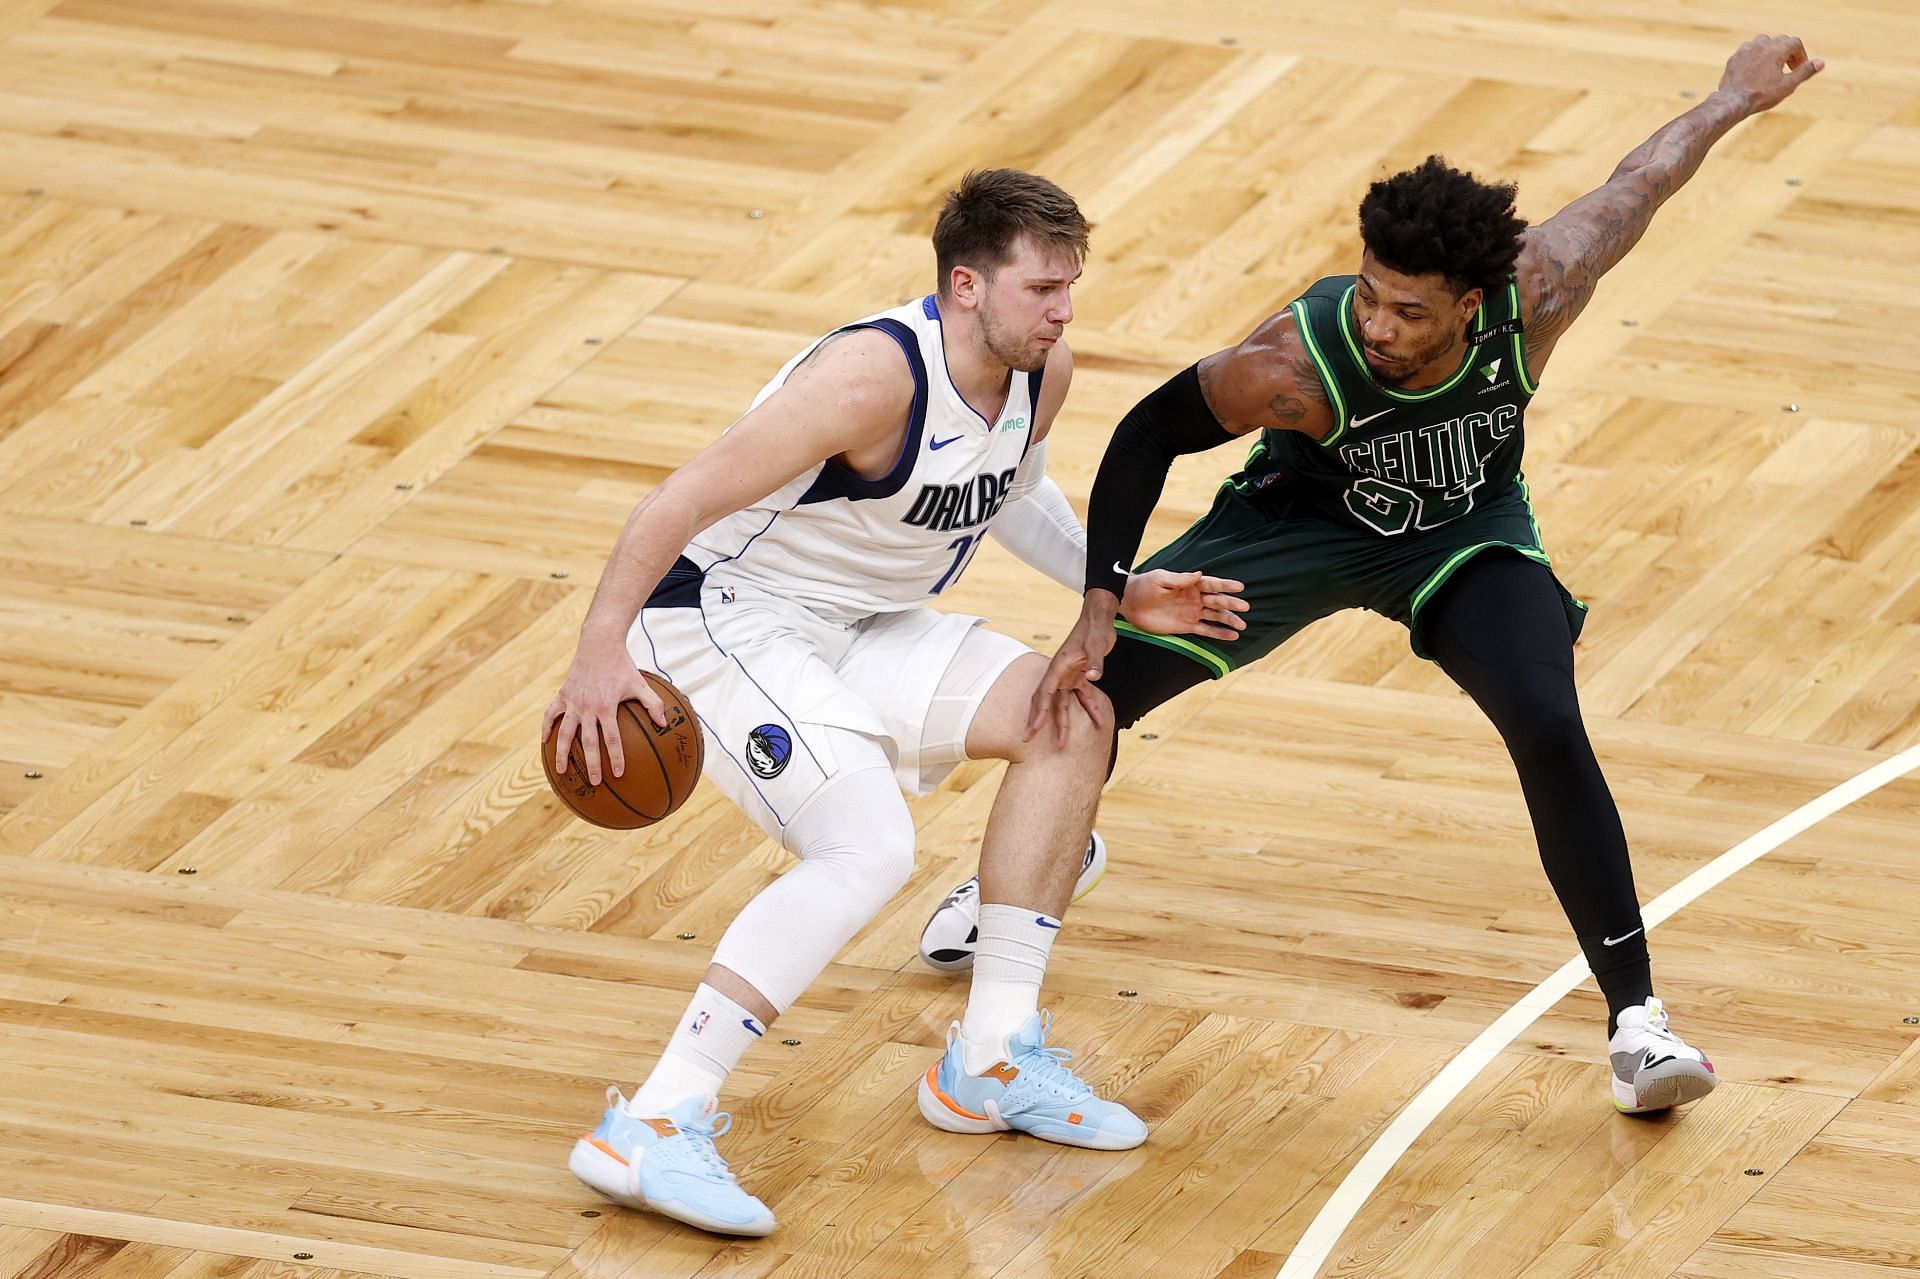 A snap from a game between the Dallas Mavericks and the Boston Celtics.